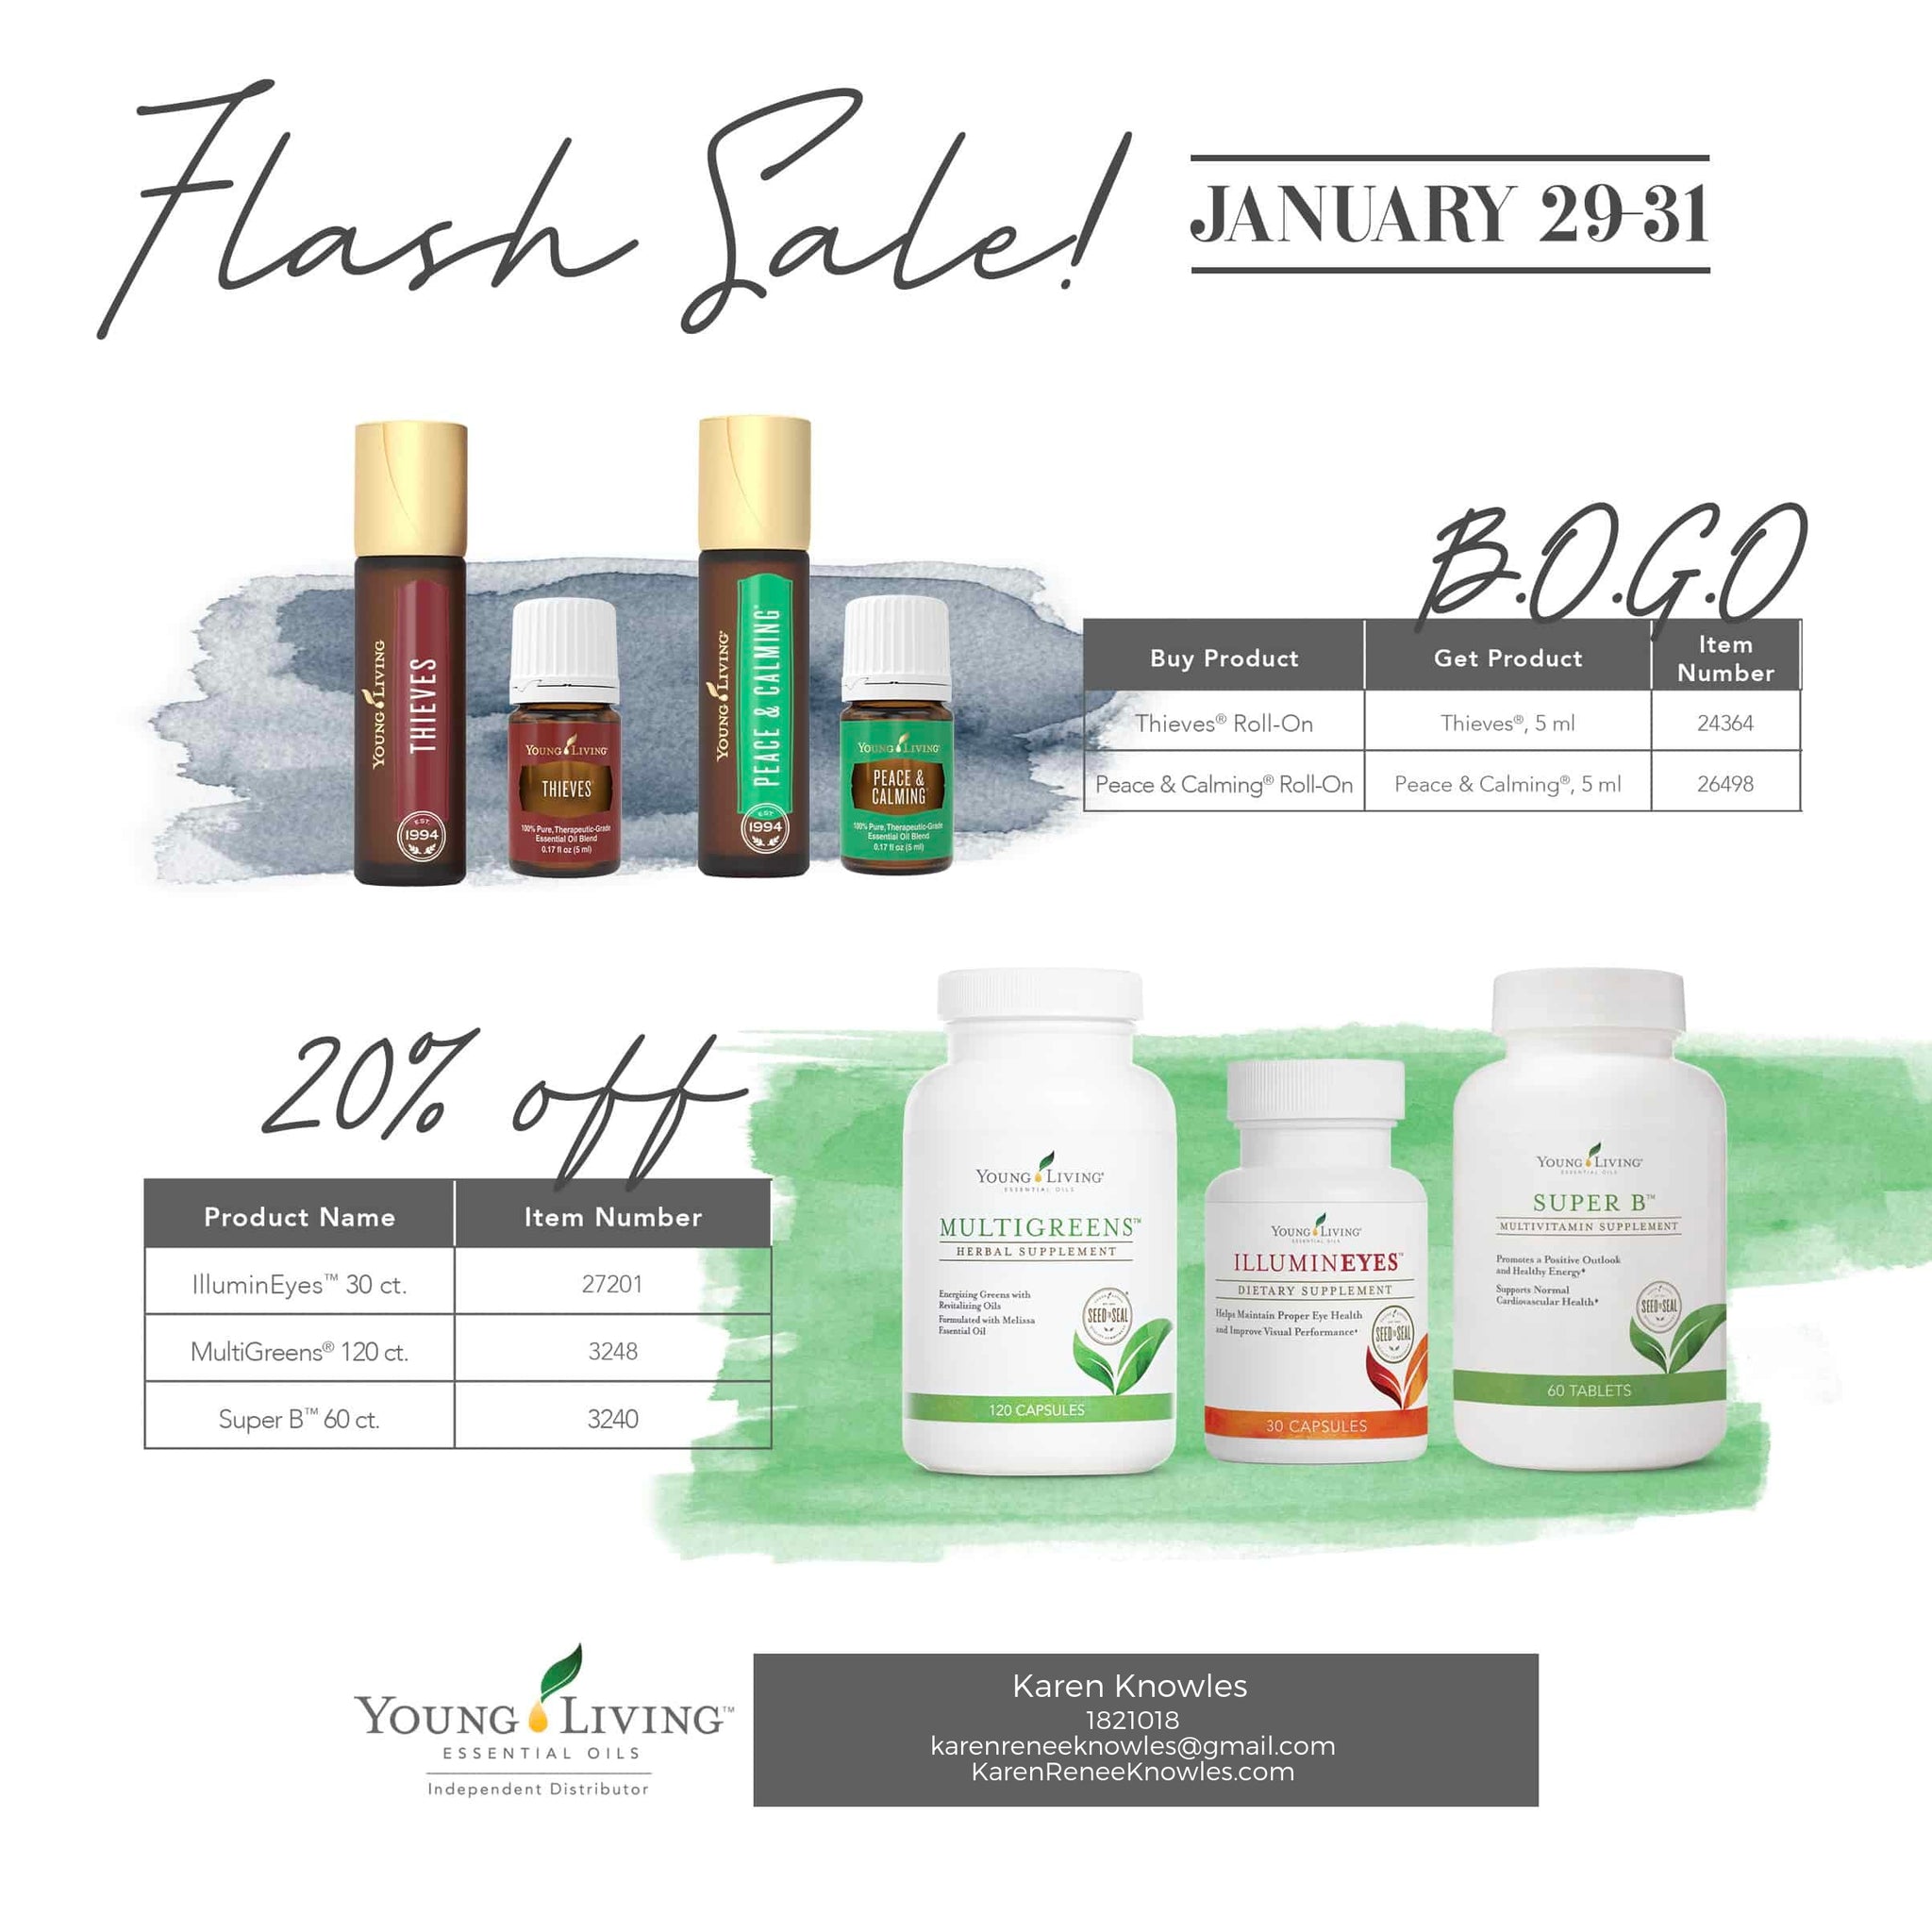 Don't miss out on YOUNG LIVING'S FLASH SALE!! Ends the 31st